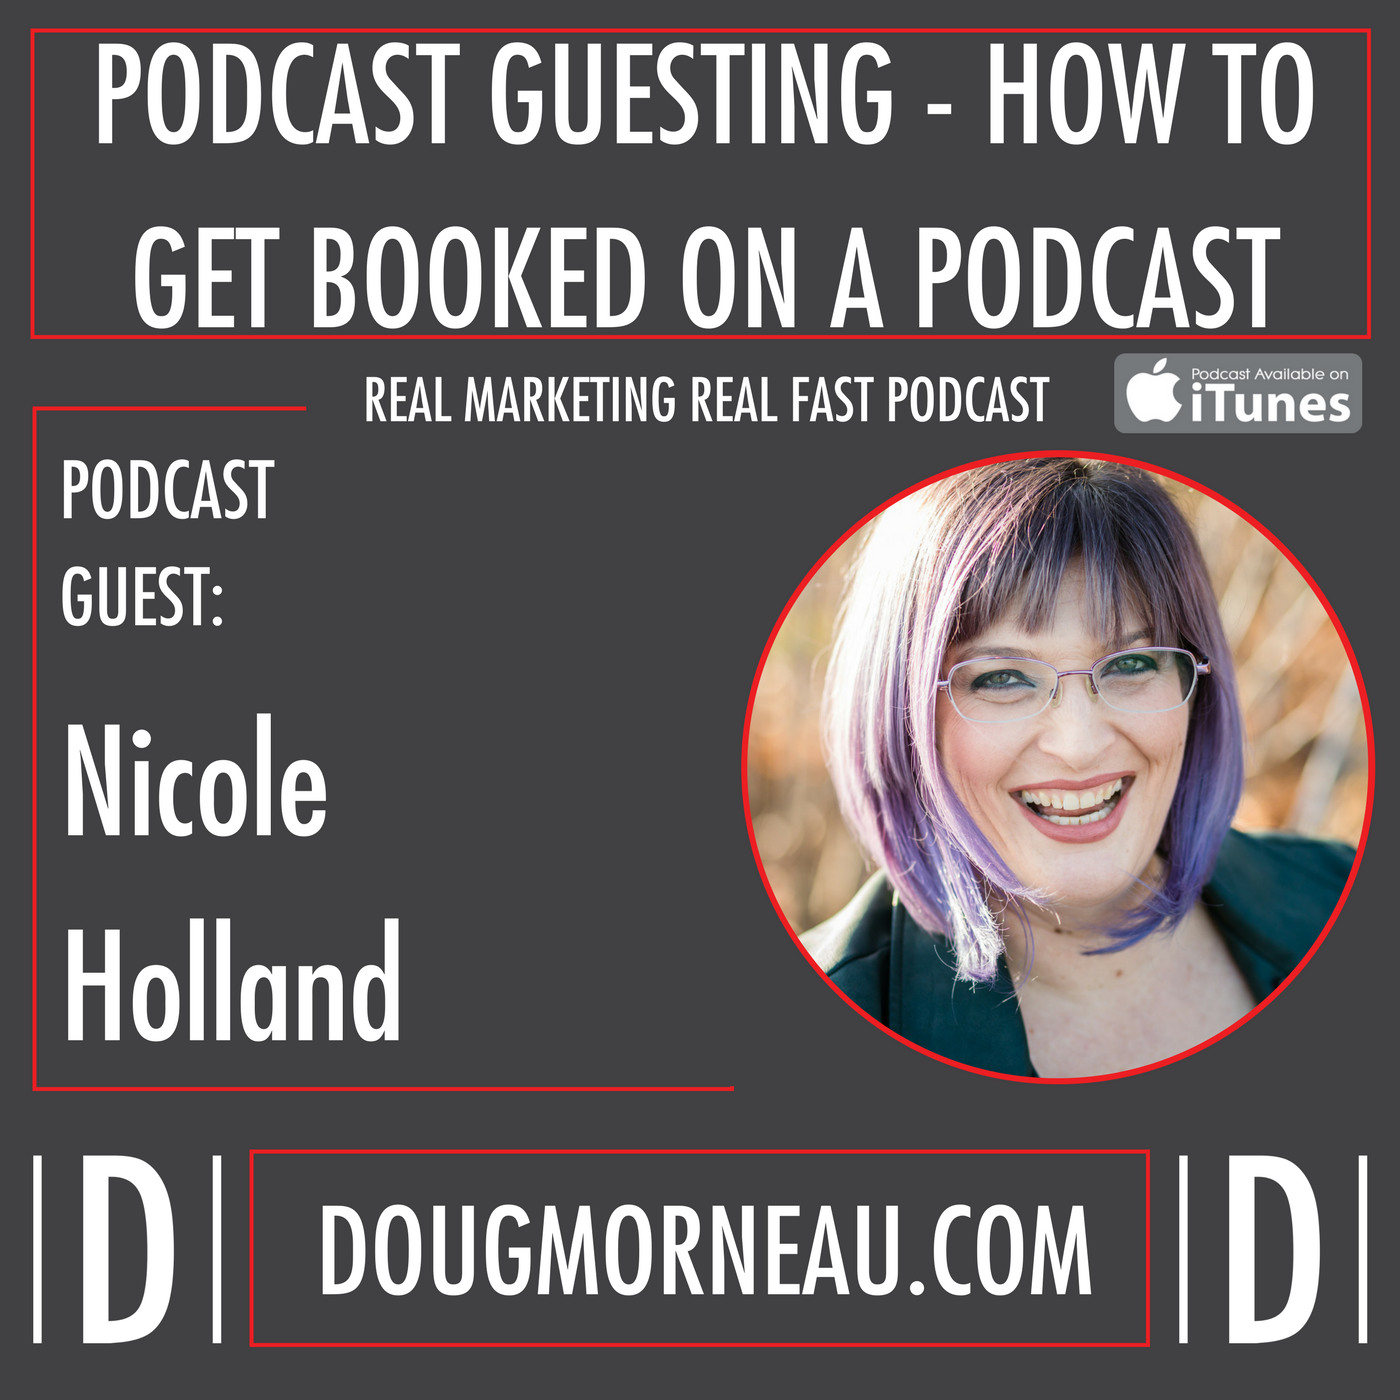 PODCAST GUESTING - HOW TO GET BOOKED ON A PODCAST - NICOLE HOLLAND - DOUG MORNEAU - REAL MARKETING REAL FAST PODCAST